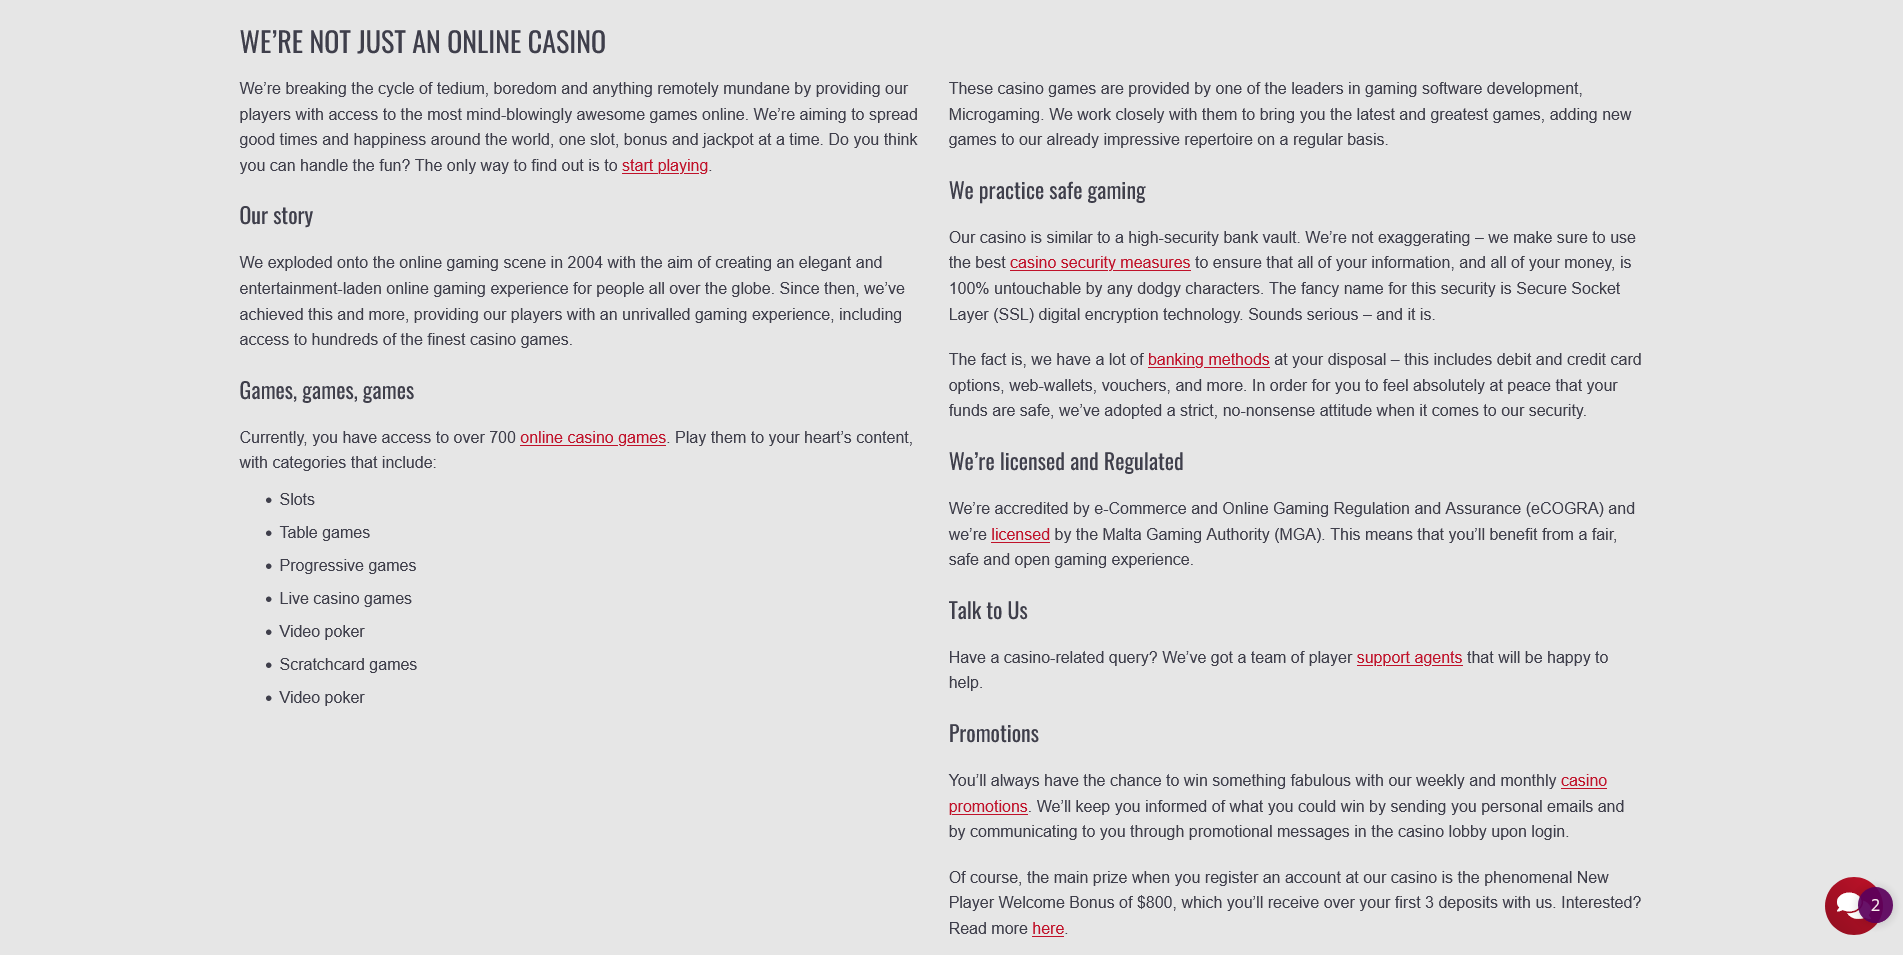 Screenshot of the "About Us" page of Platinum Play Casino